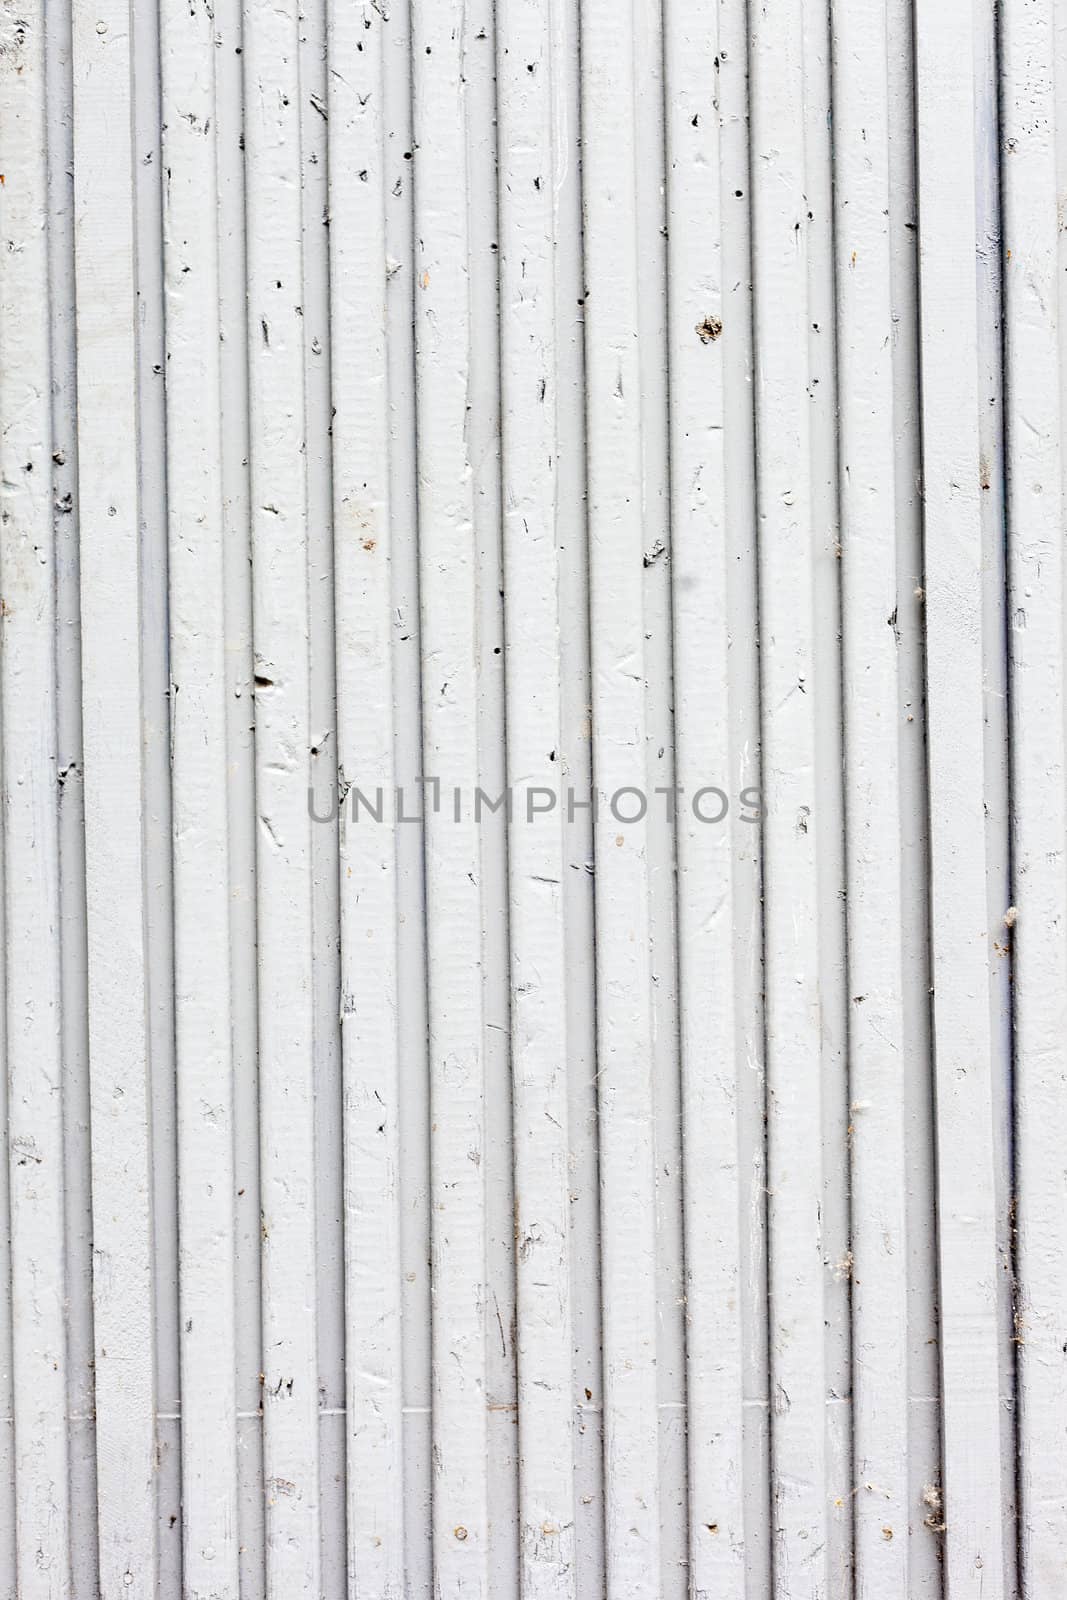 Vintage or grungy white background of natural wood or wooden old texture as a retro pattern wall.